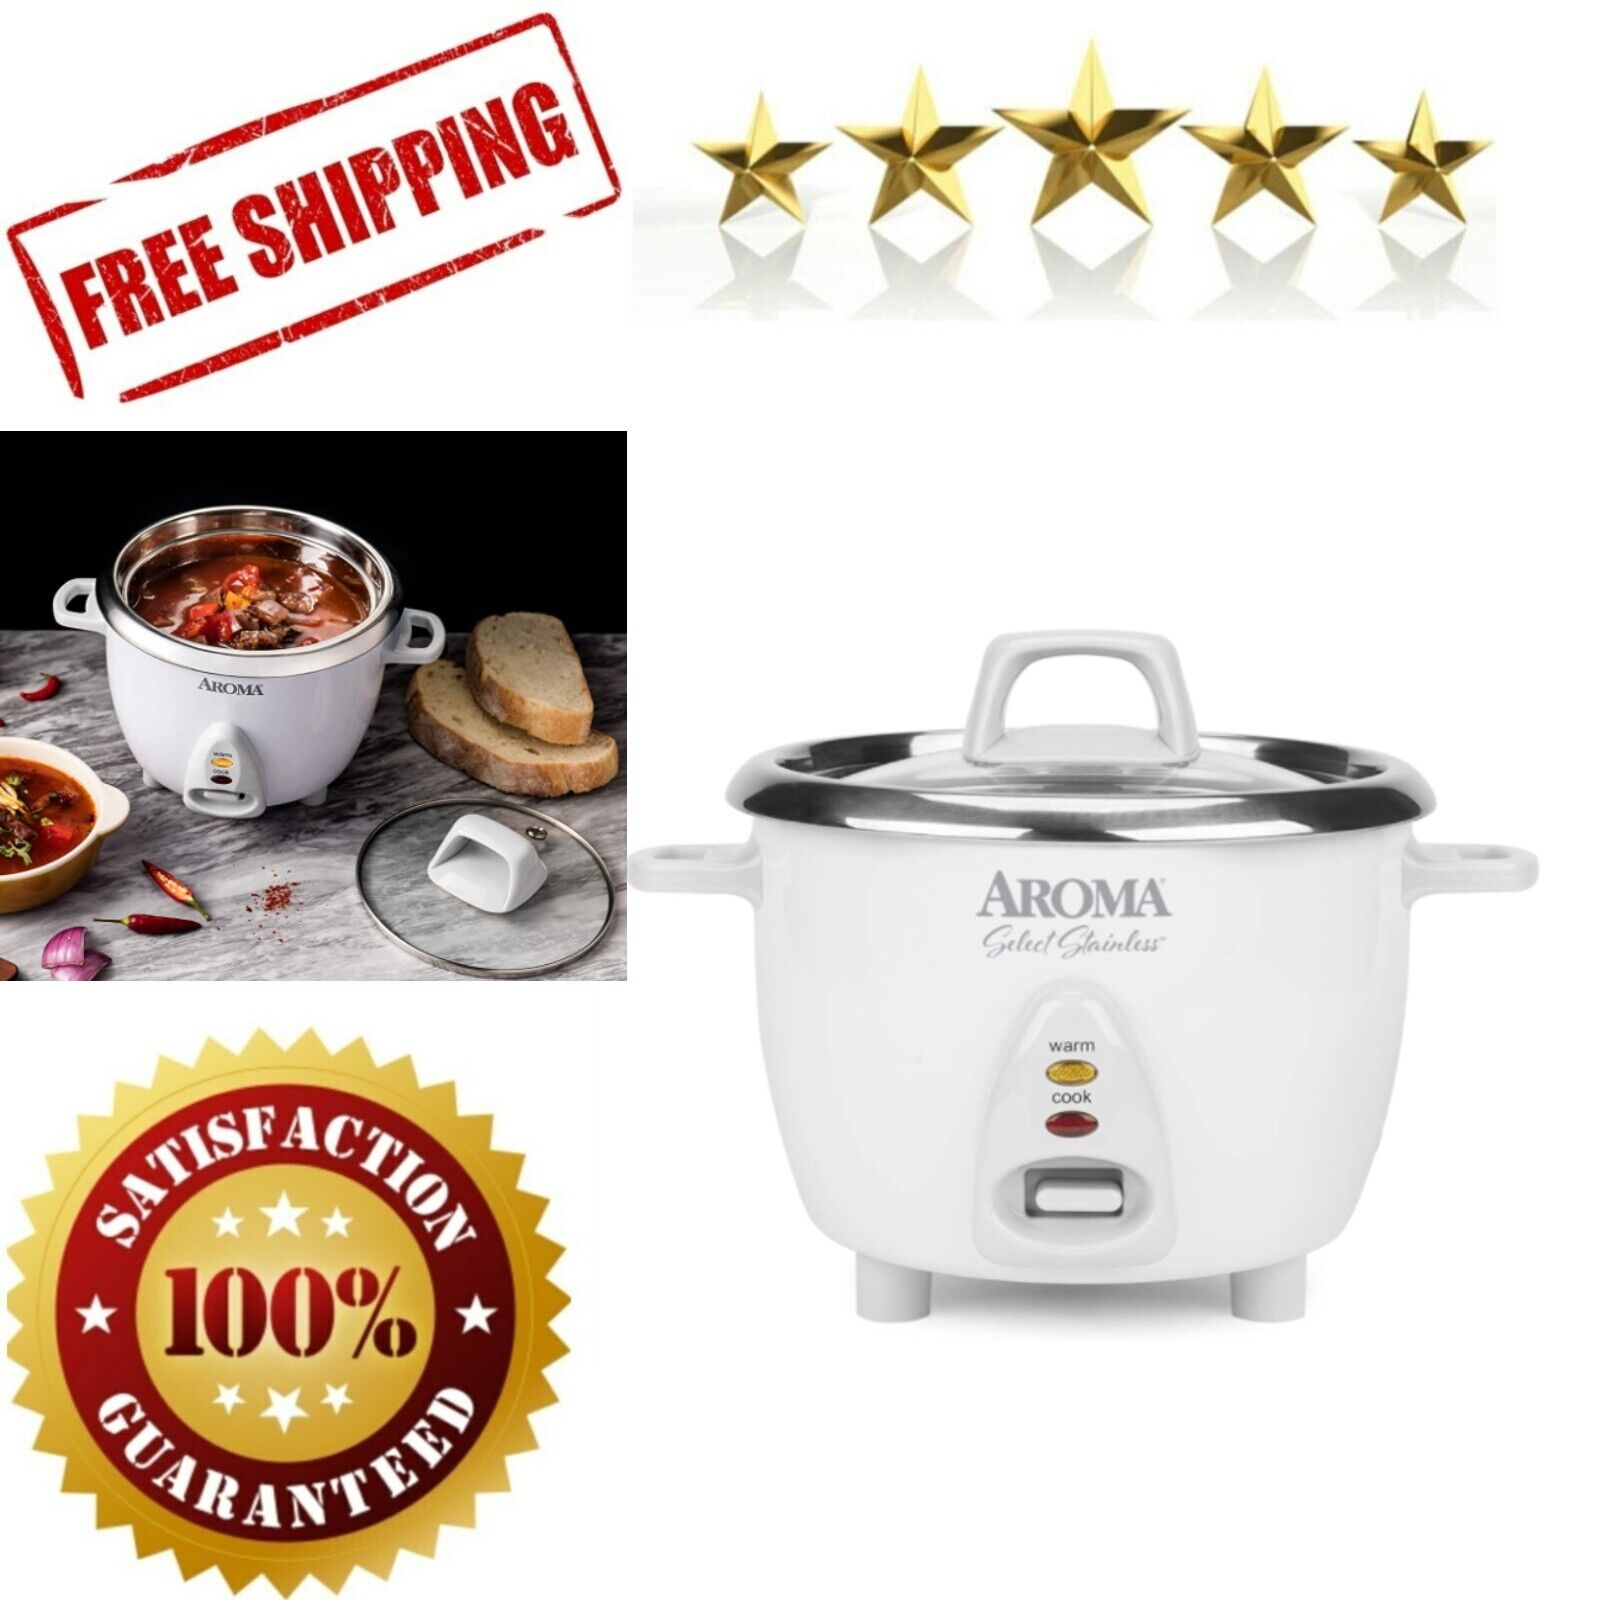 Rice Cooker Stainless Max 45% Ranking TOP15 OFF Steel Warmer 6-Cup with Inner Pot Uncoated